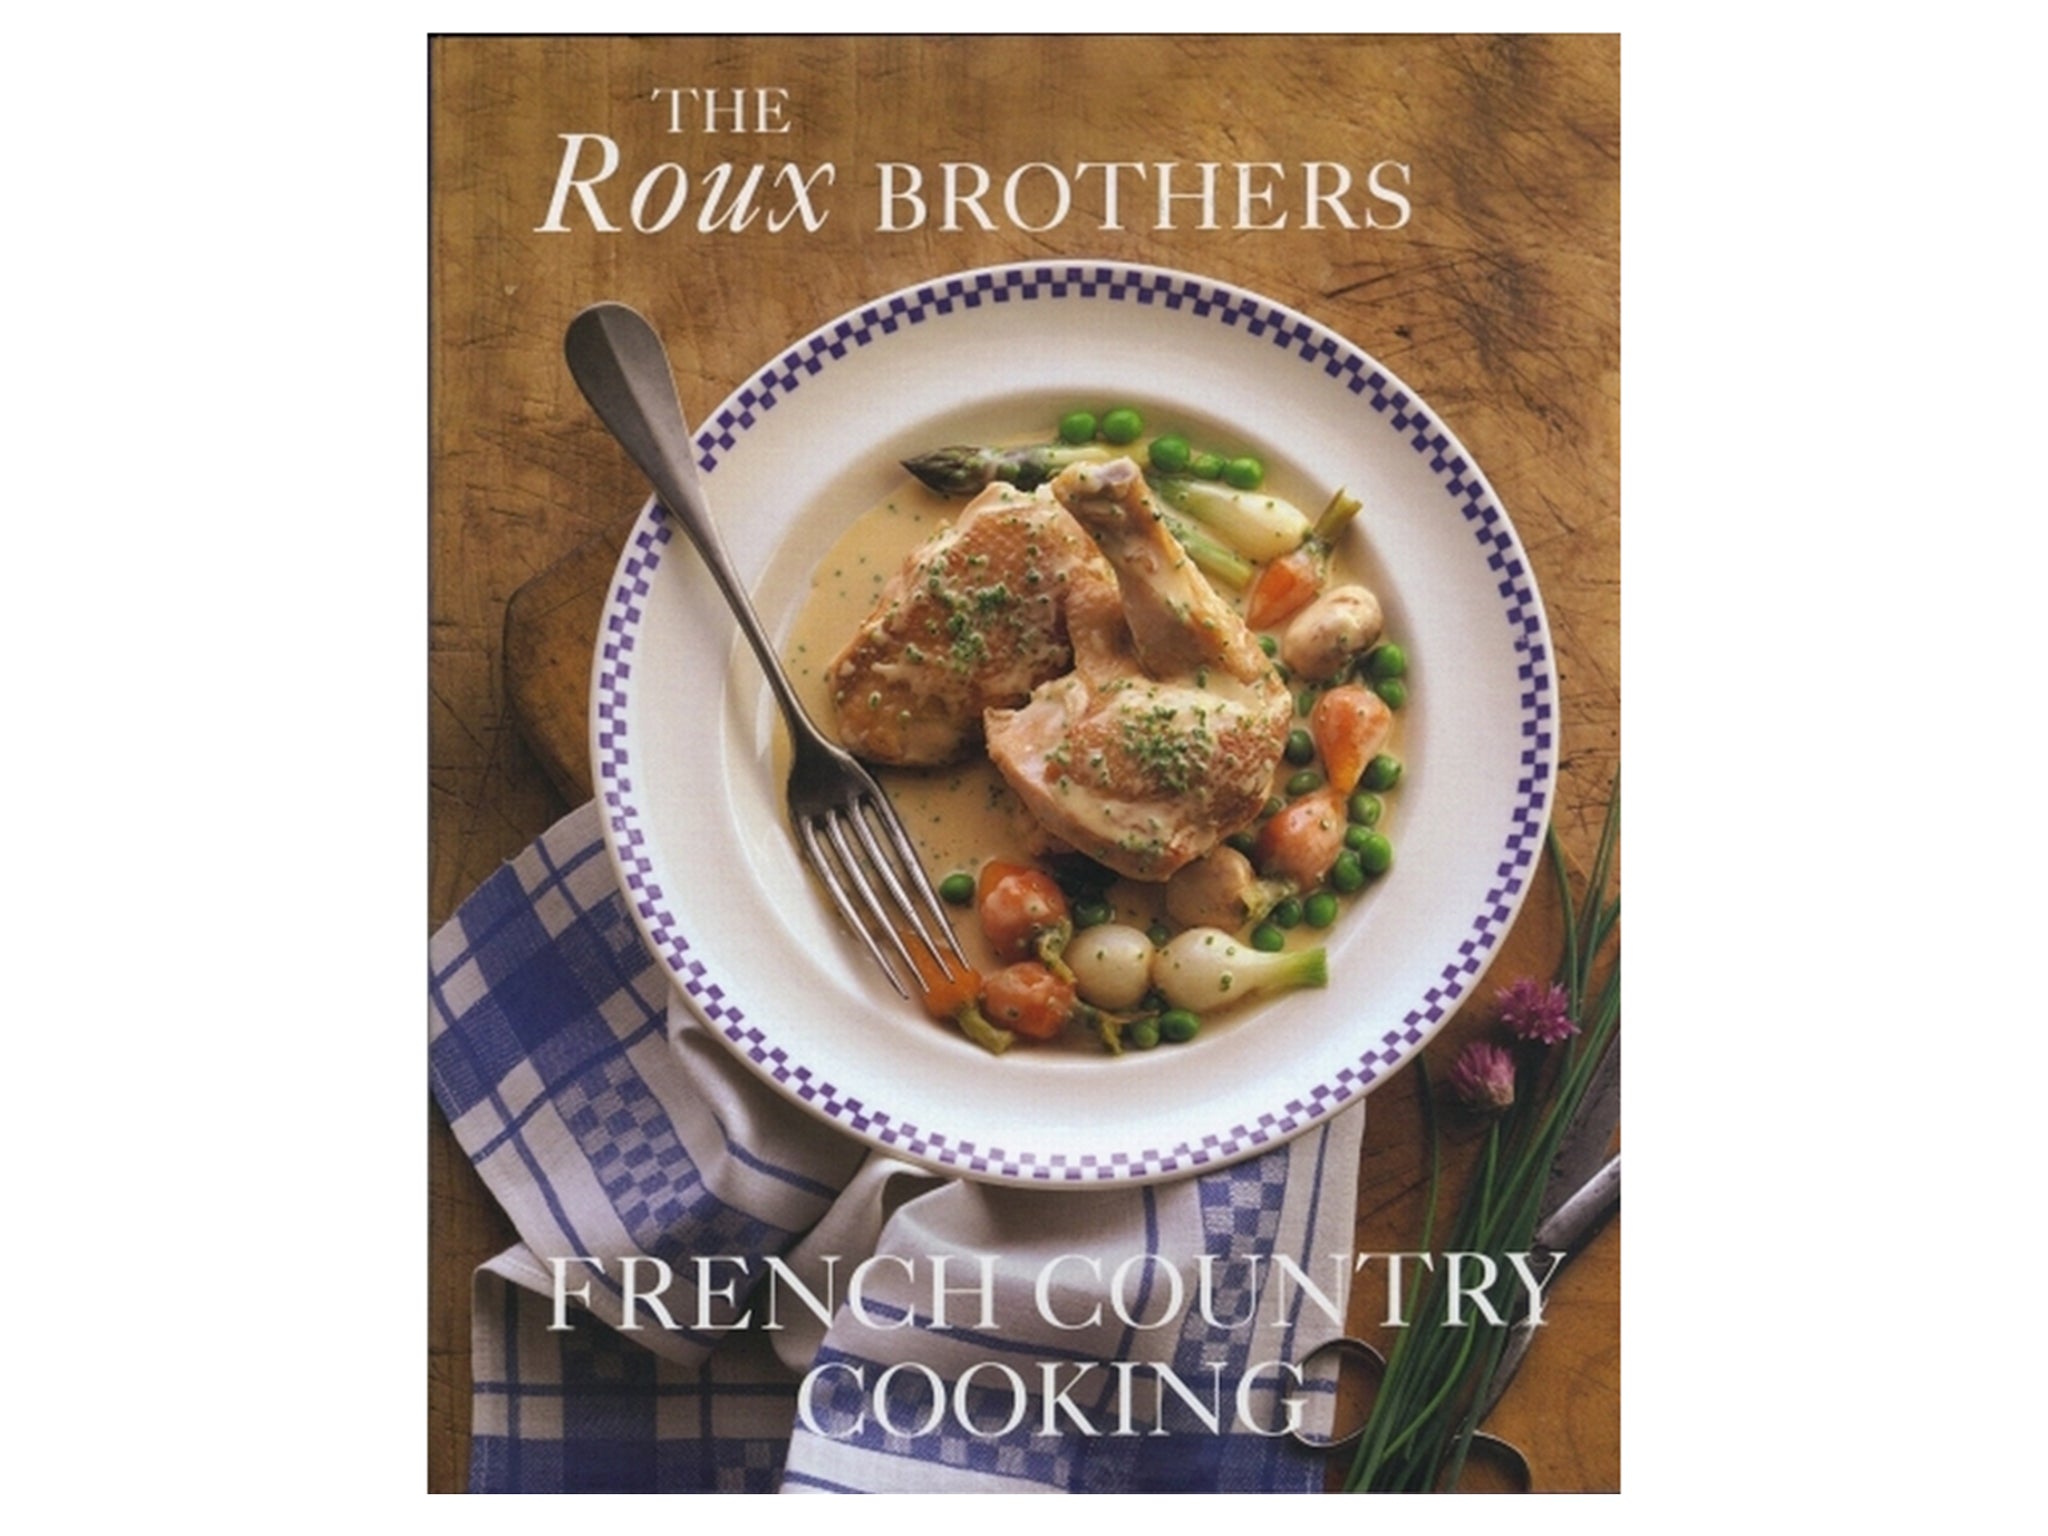 FRENCH_COUNTRY_COOKING__roux-brothers-indybest.jpg